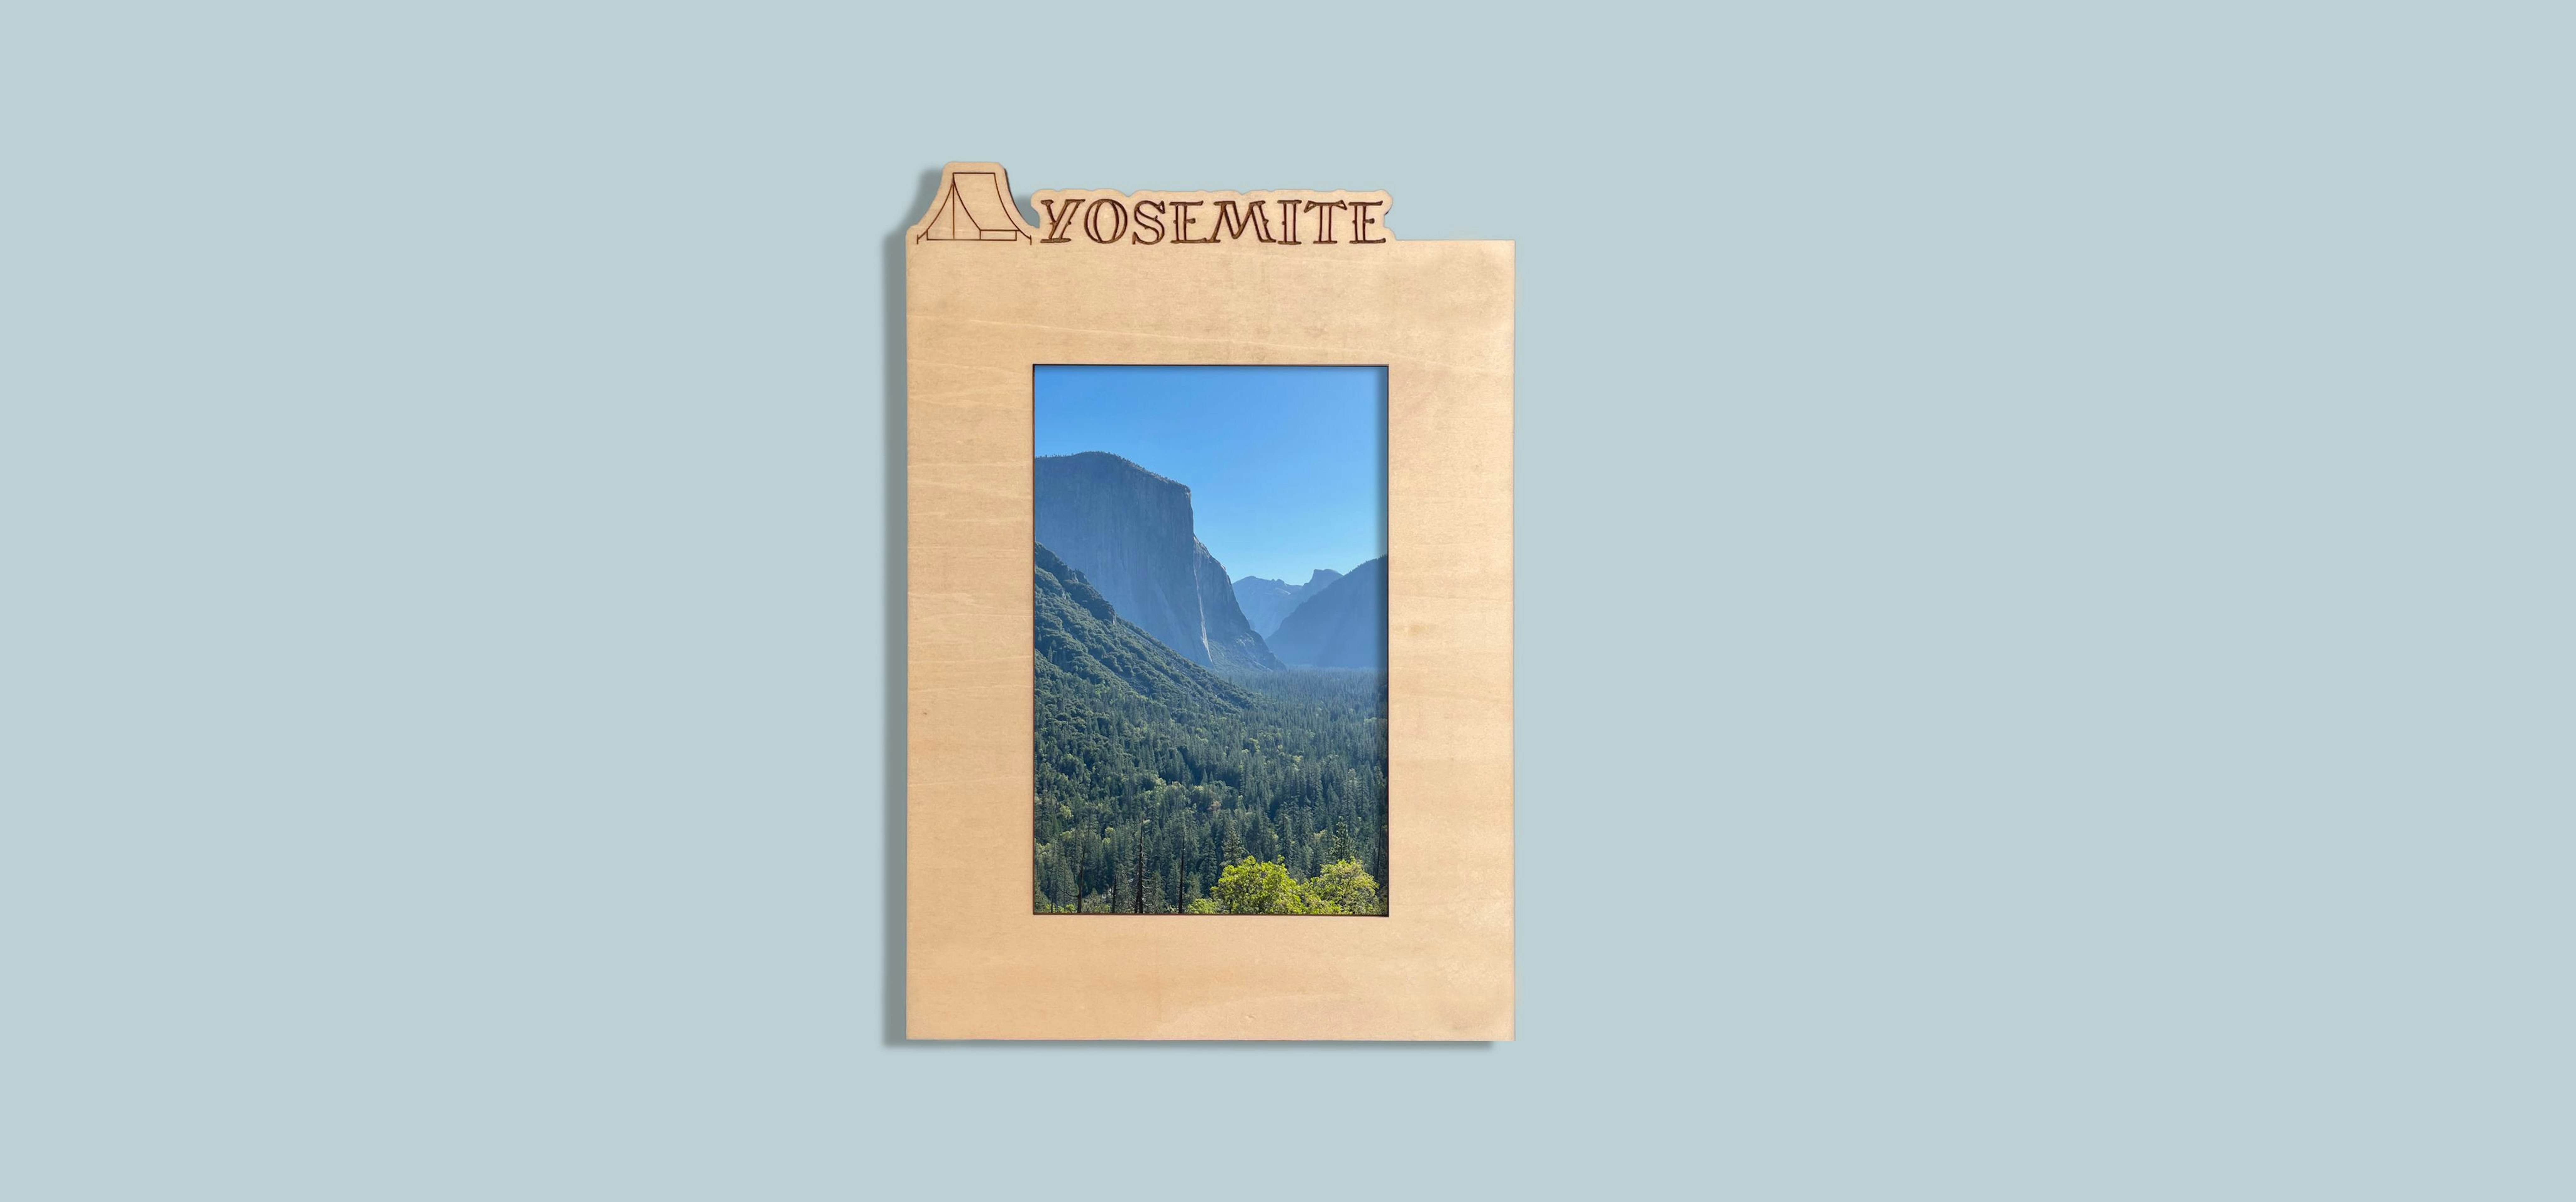 A completed, laser cut photo frame